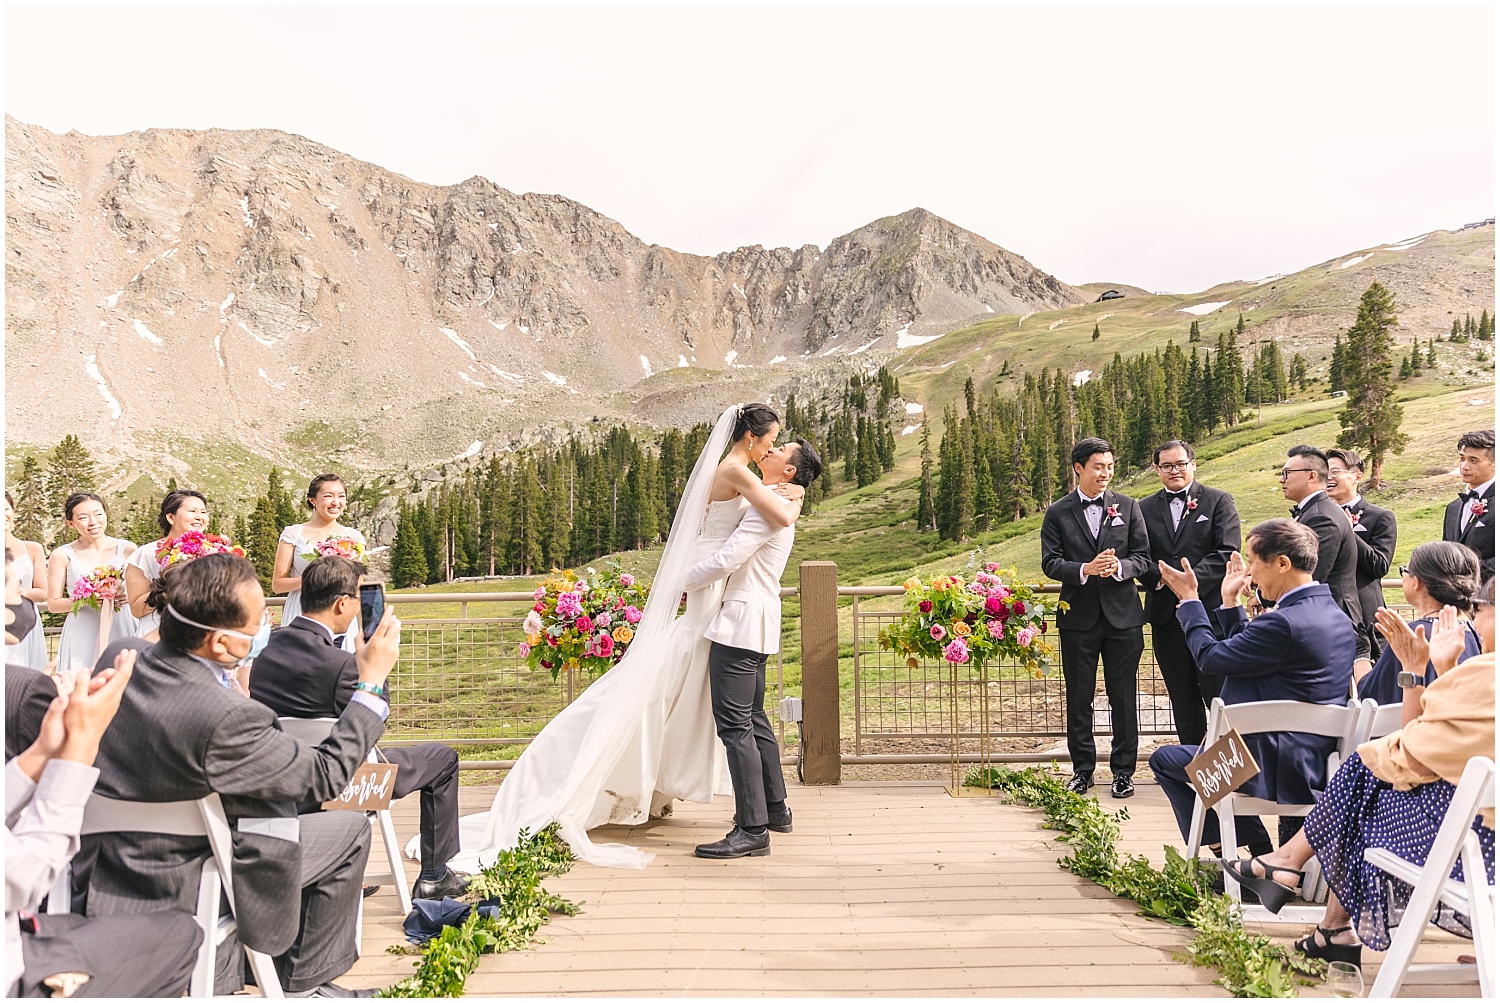 First kiss at Black Mountain Lodge wedding ceremony Arapahoe Basin